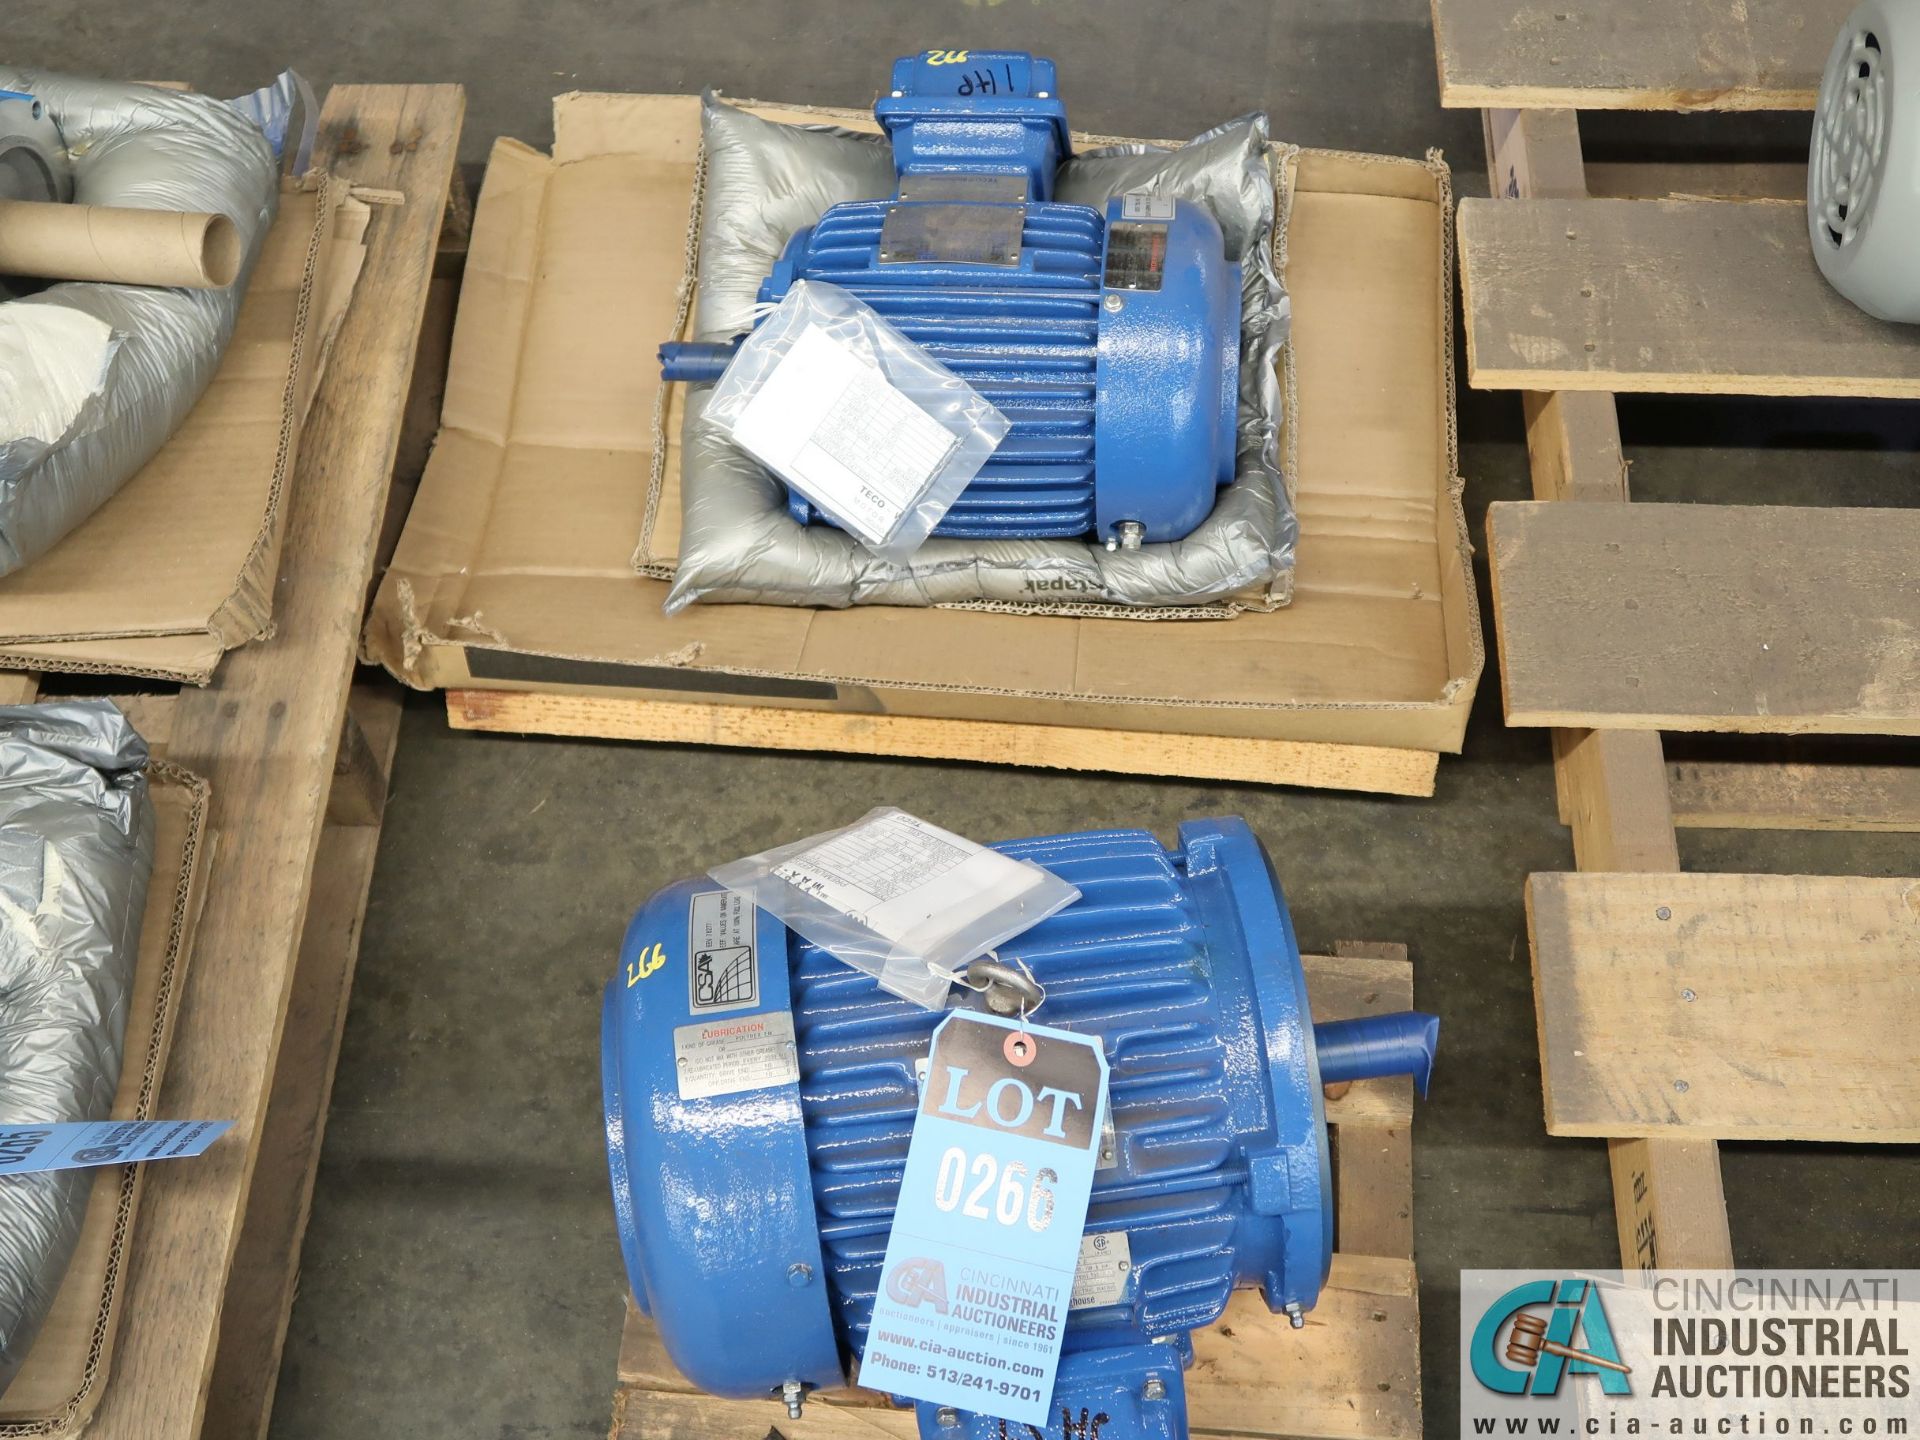 1.5 AND 1 HP WESTINGHOUSE ELECTRIC MOTORS (NEW)